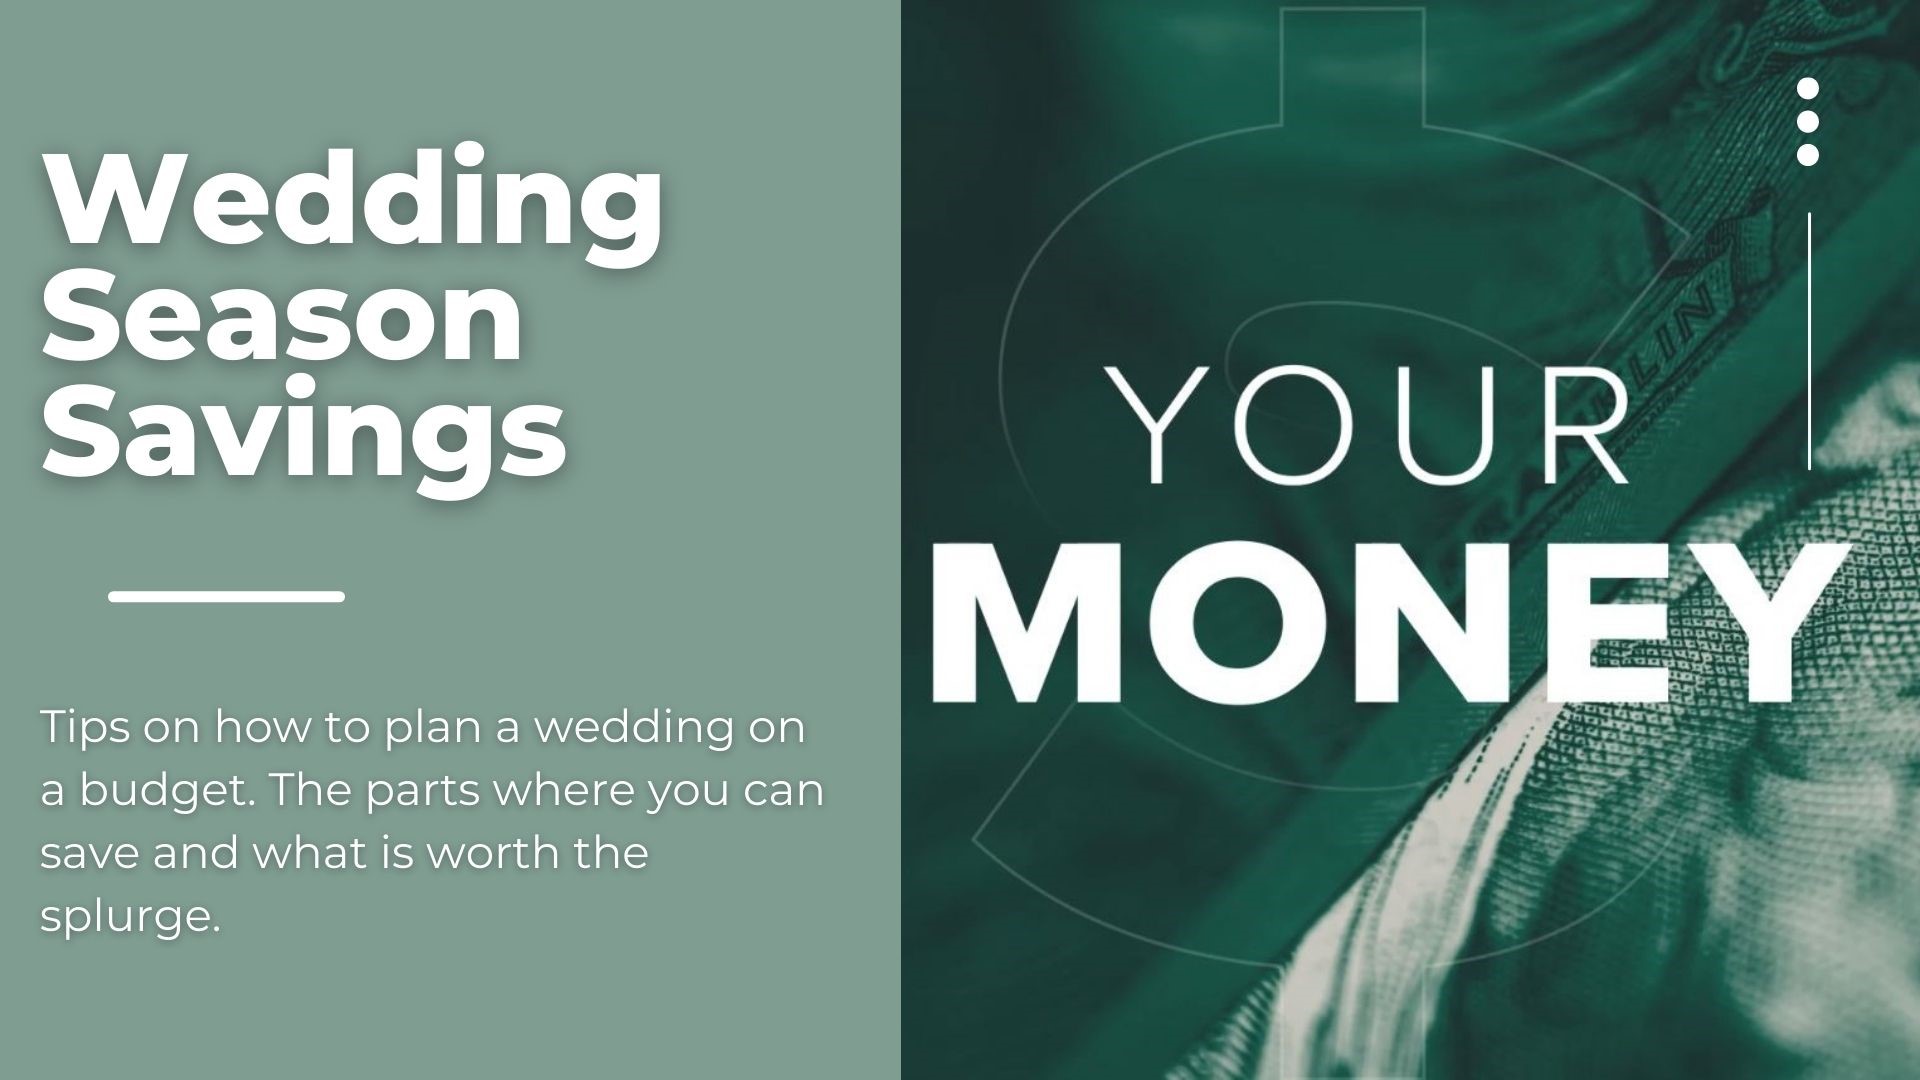 Tips on how to plan a wedding on a budget. The parts where you can save some money and what is worth the splurge.